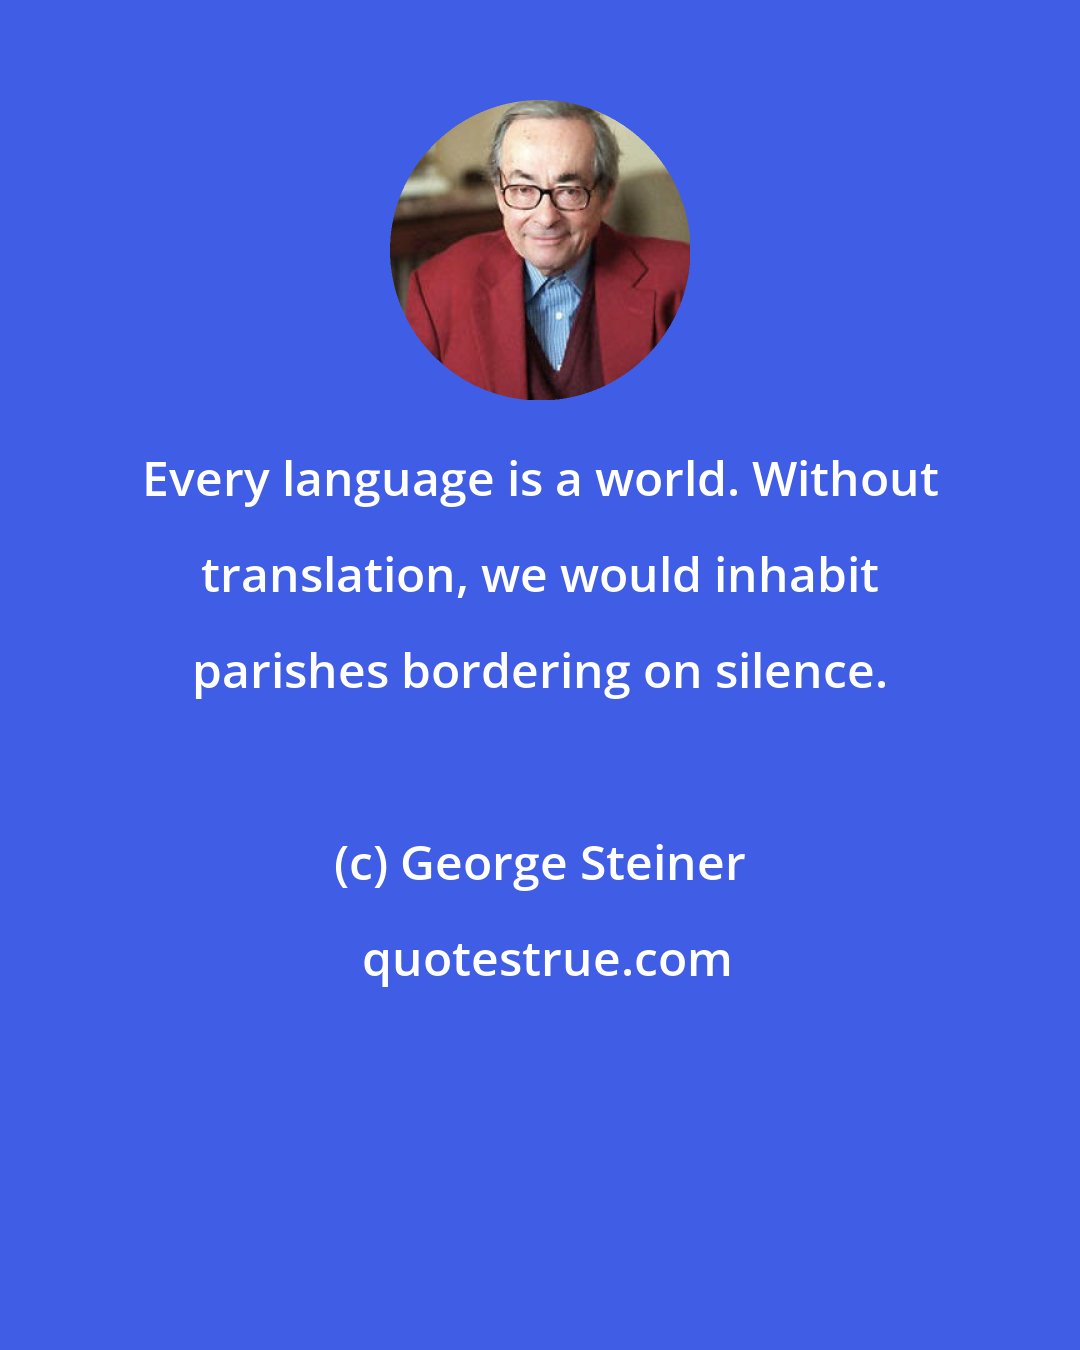 George Steiner: Every language is a world. Without translation, we would inhabit parishes bordering on silence.